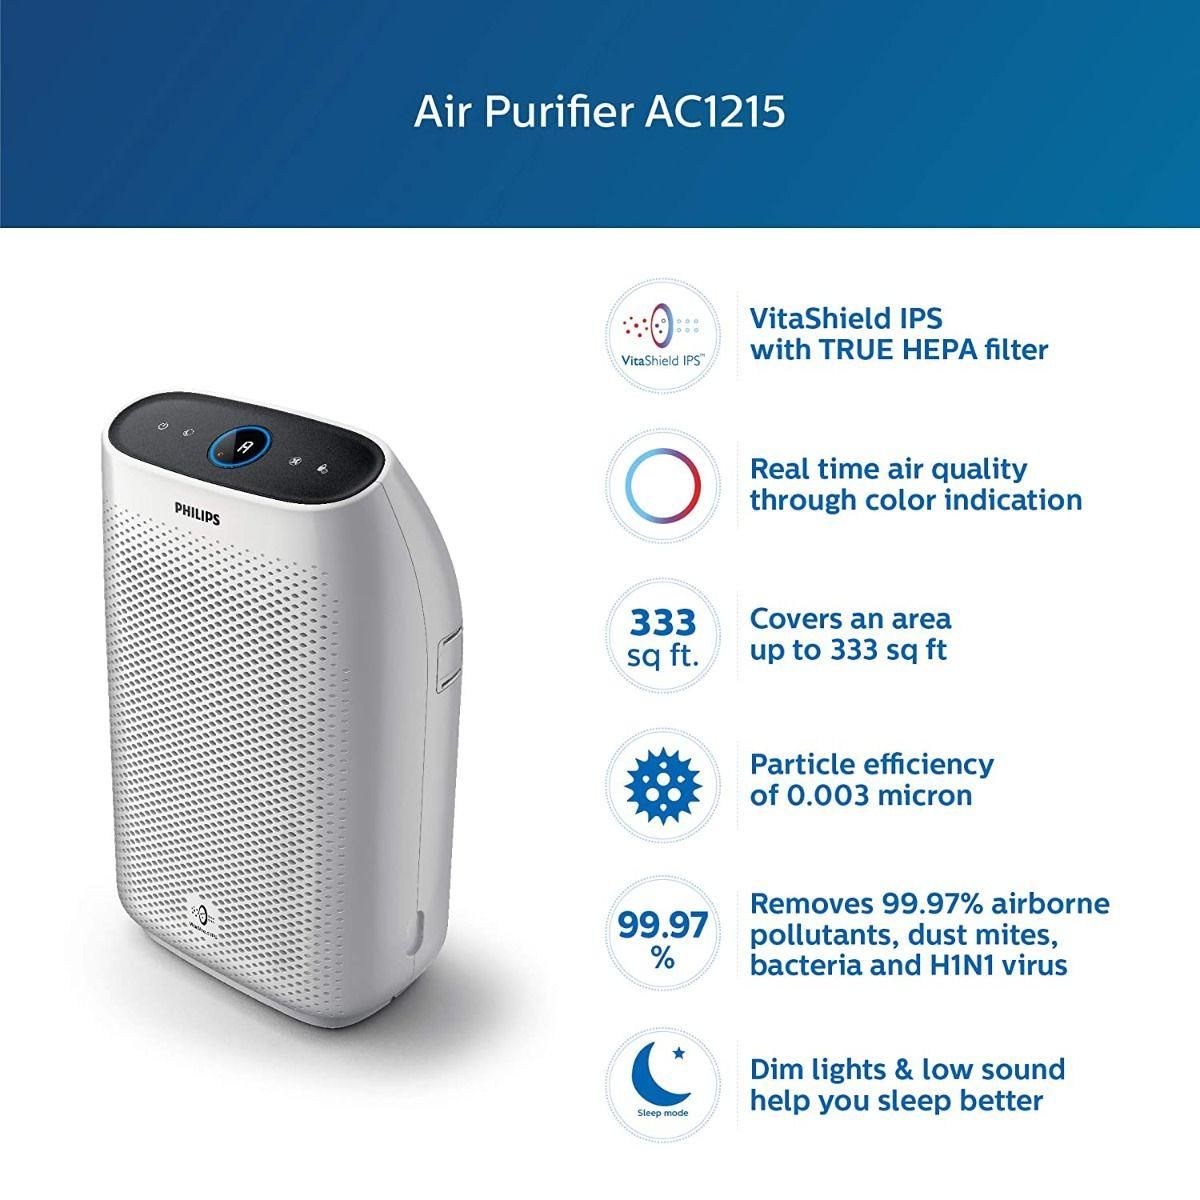 Can I clean the filters and pre-filter of my Philips Air Purifier?